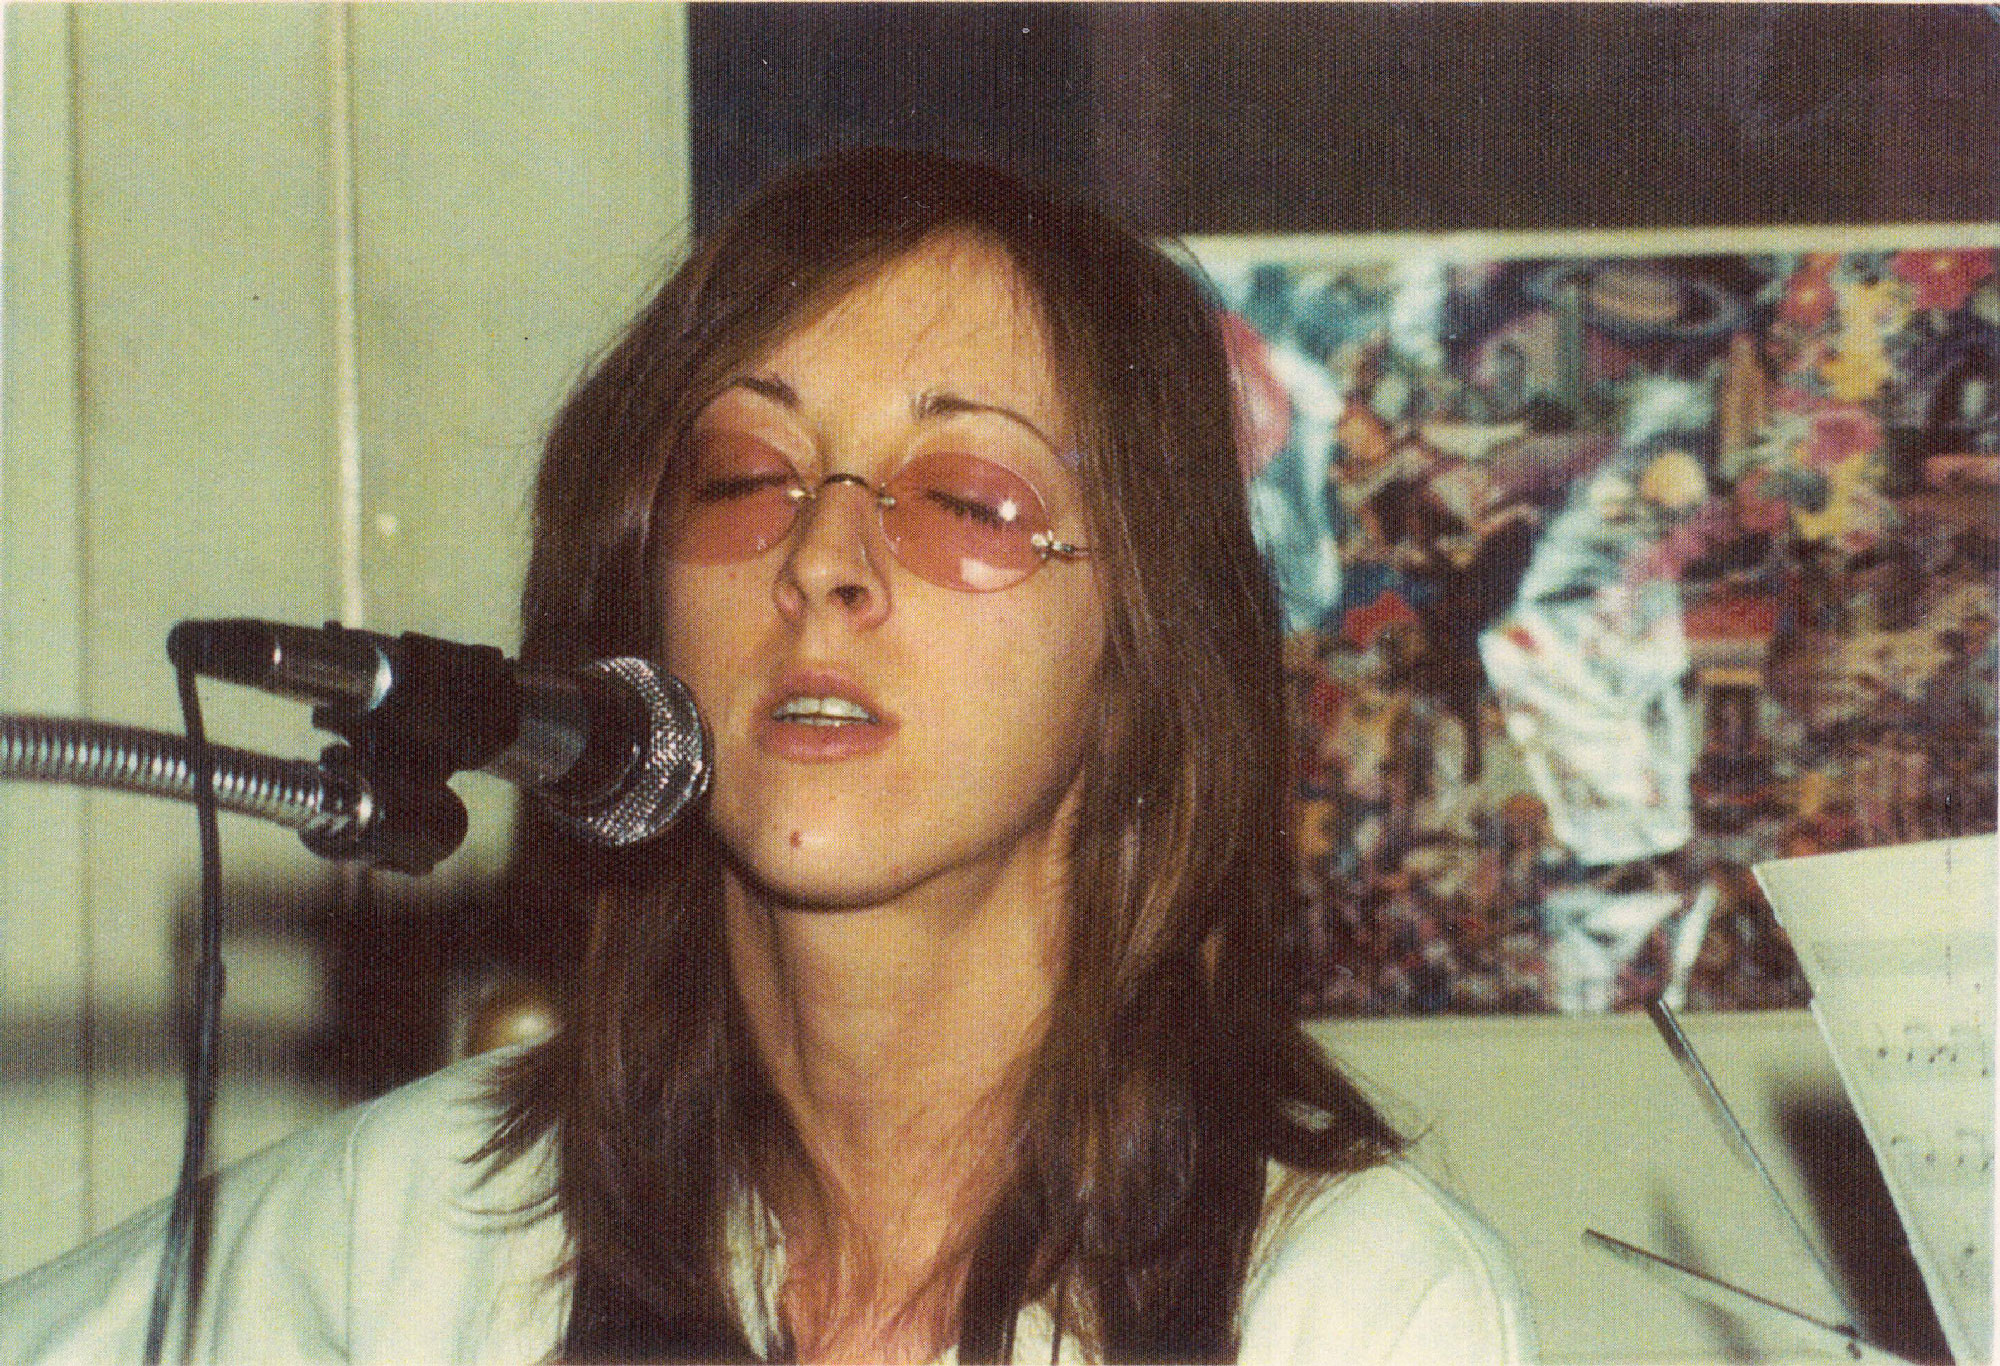 Person with eyes closed singing into mic with rose-colored glasses